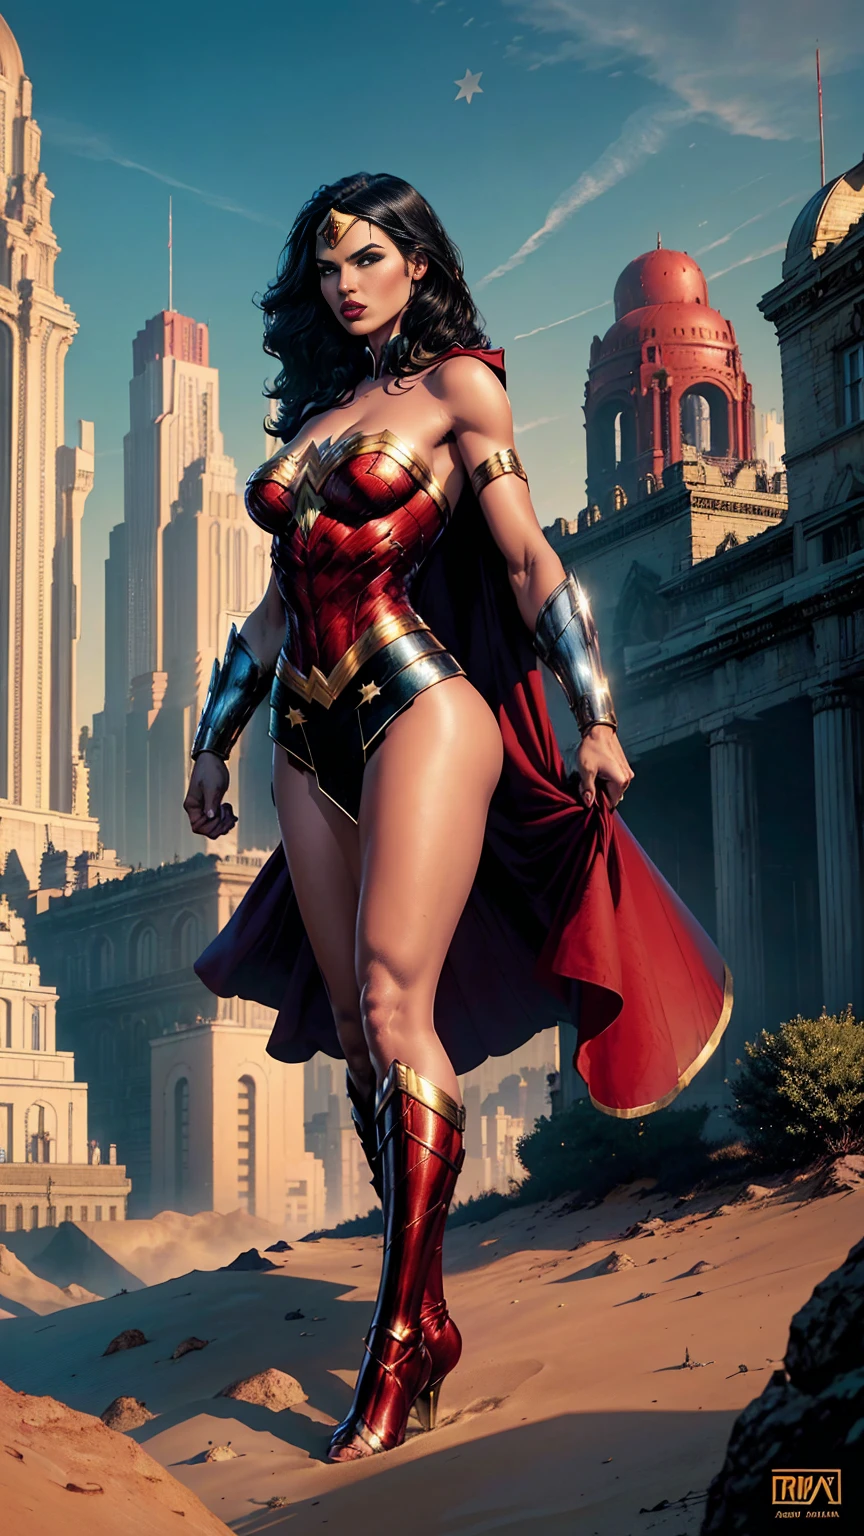 ((full body photo, standing, feet on the ground)) (Adriana Lima :1.1) Red lips, green eyes, ((full body photo, standing, feet on the ground)) Wonder Woman stands imposingly in a city from Themyscira. The scenery is lush. The camera details everything, a warrior woman, cover with stars
.

